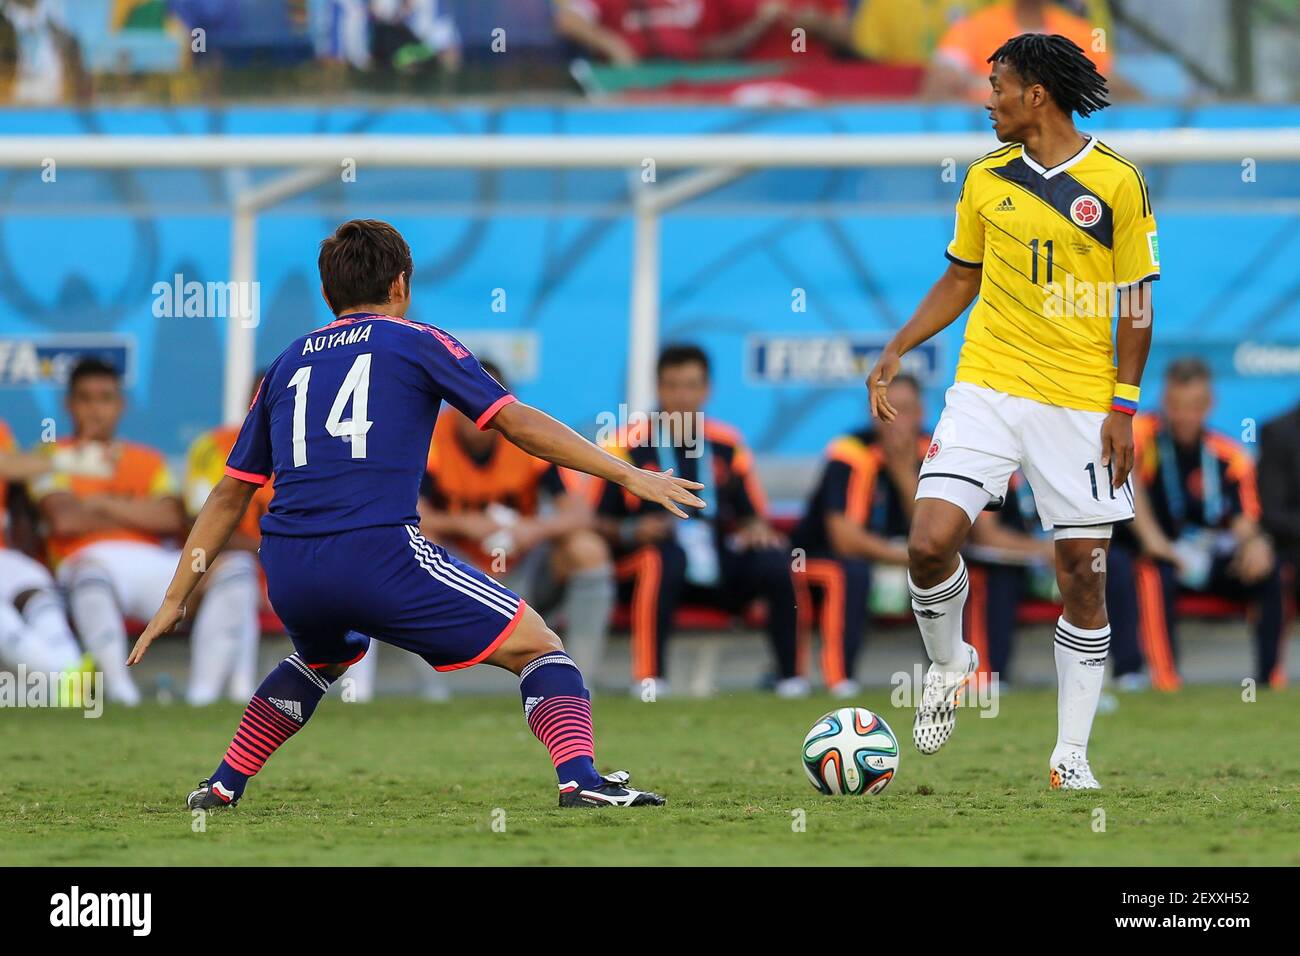 Japan's Toshihiro AOYAMA (L) vies with Colombia's Juan CUADRADO (R) during the group C 2014 FIFA World Cup soccer match between Japan and Colombia, in Arena Pantanal Stadium in Cuiaba, Brazil, on June 24, 2014. Photo by Dudu Macedo/Fotoarena/Sipa USA Stock Photo